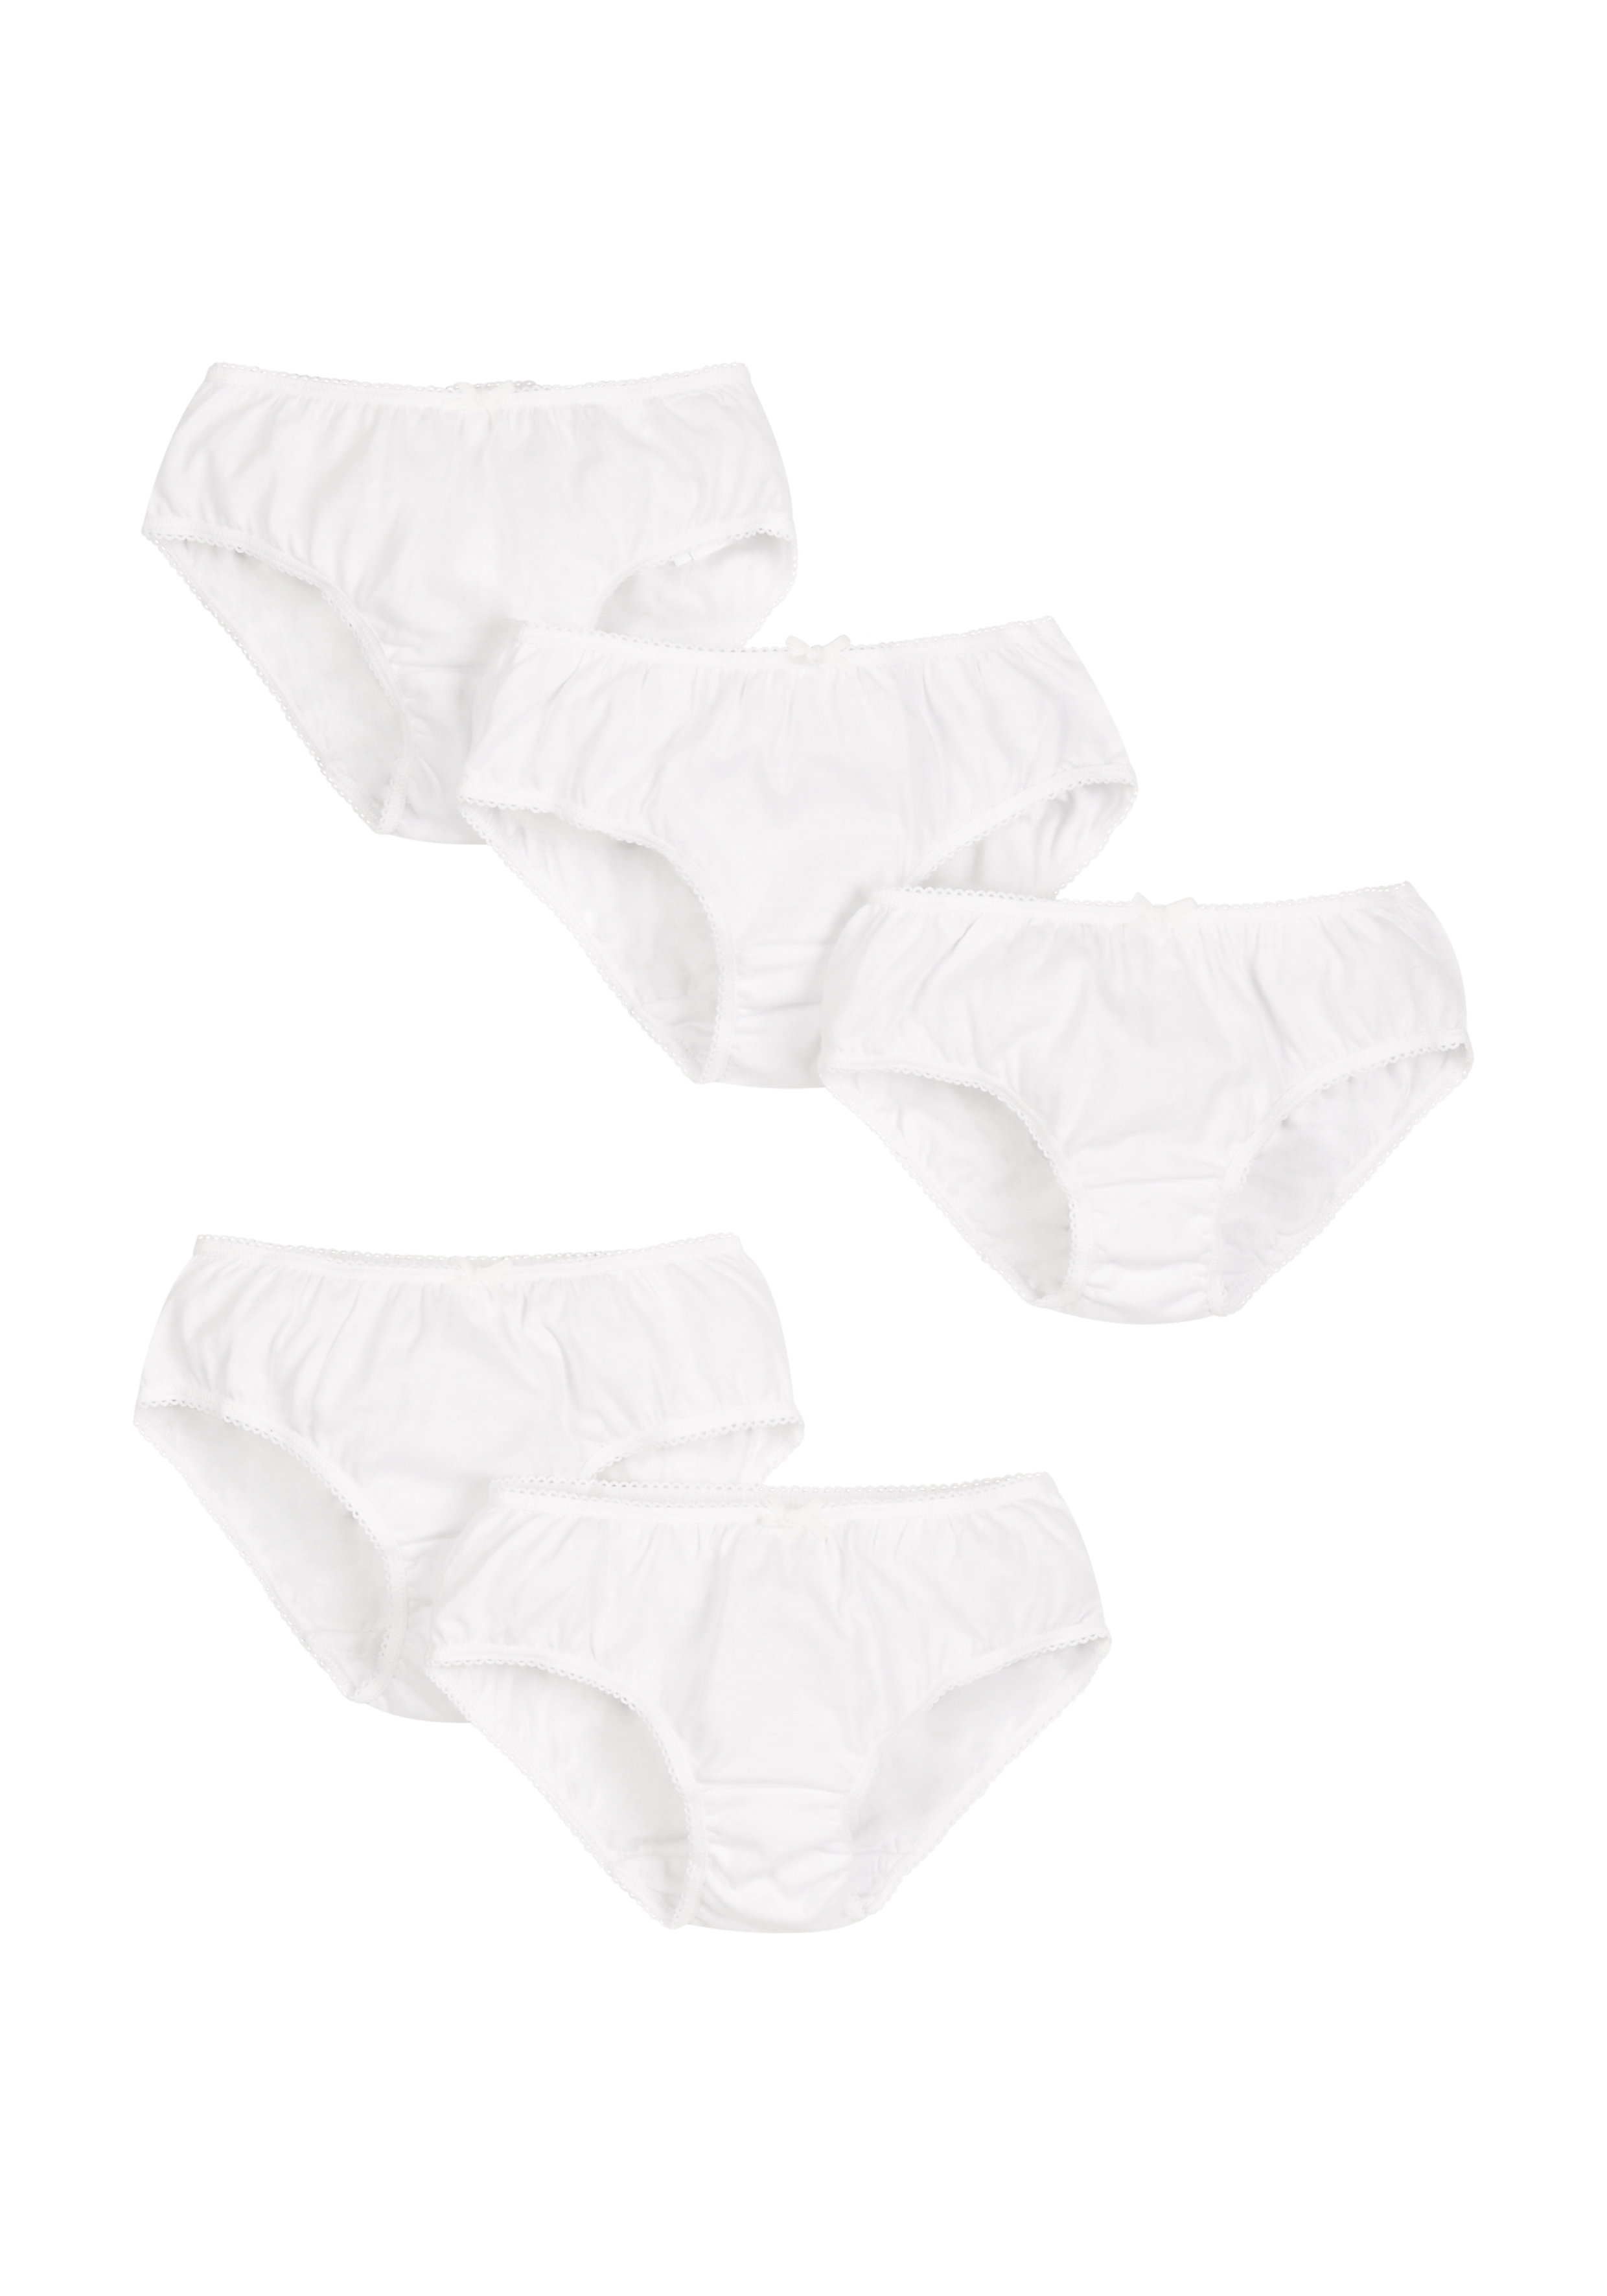 Mothercare | Girls Briefs  - Pack Of 5 - White